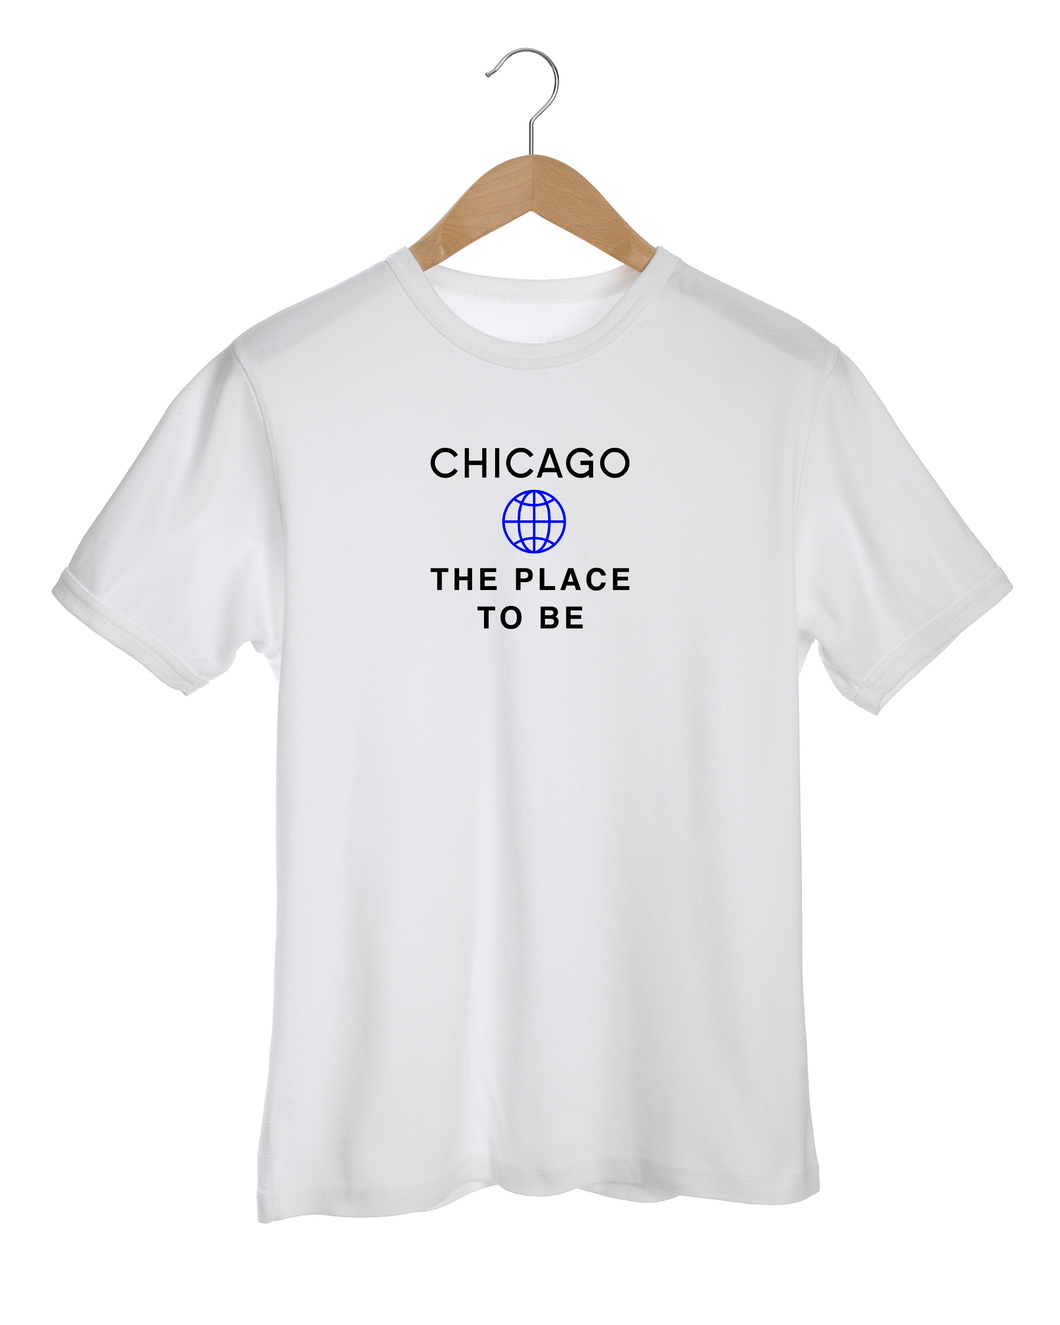 Example Product Page CHICAGO